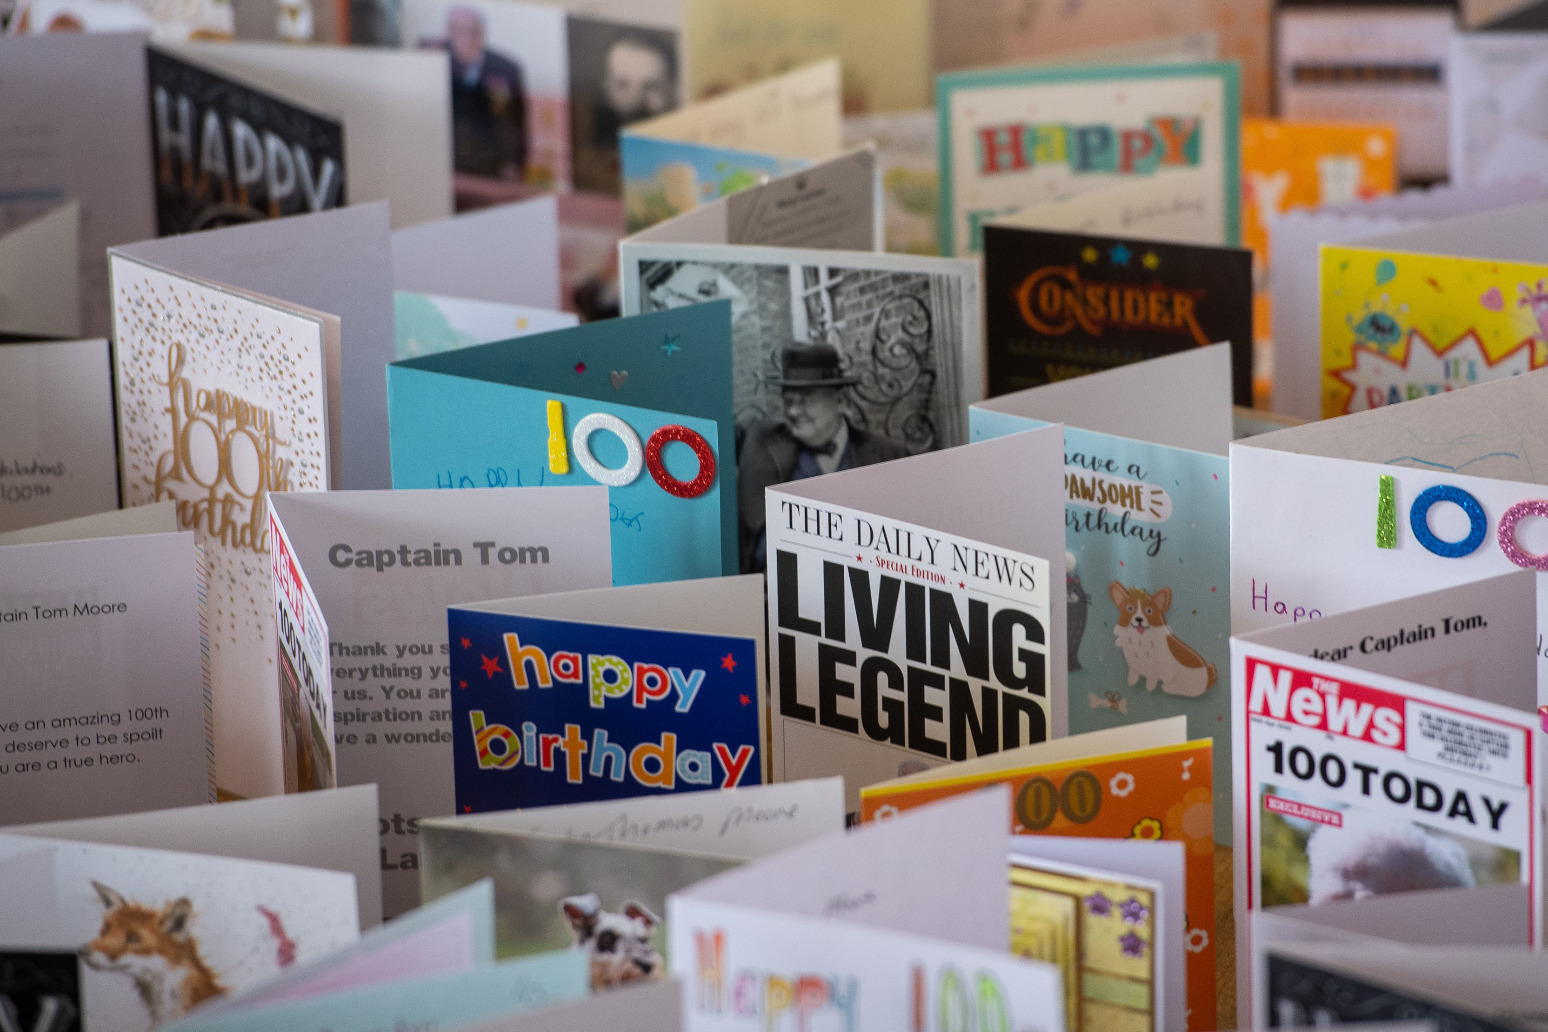 Captain Tom Moore has been sent over 125,000 birthday cards 